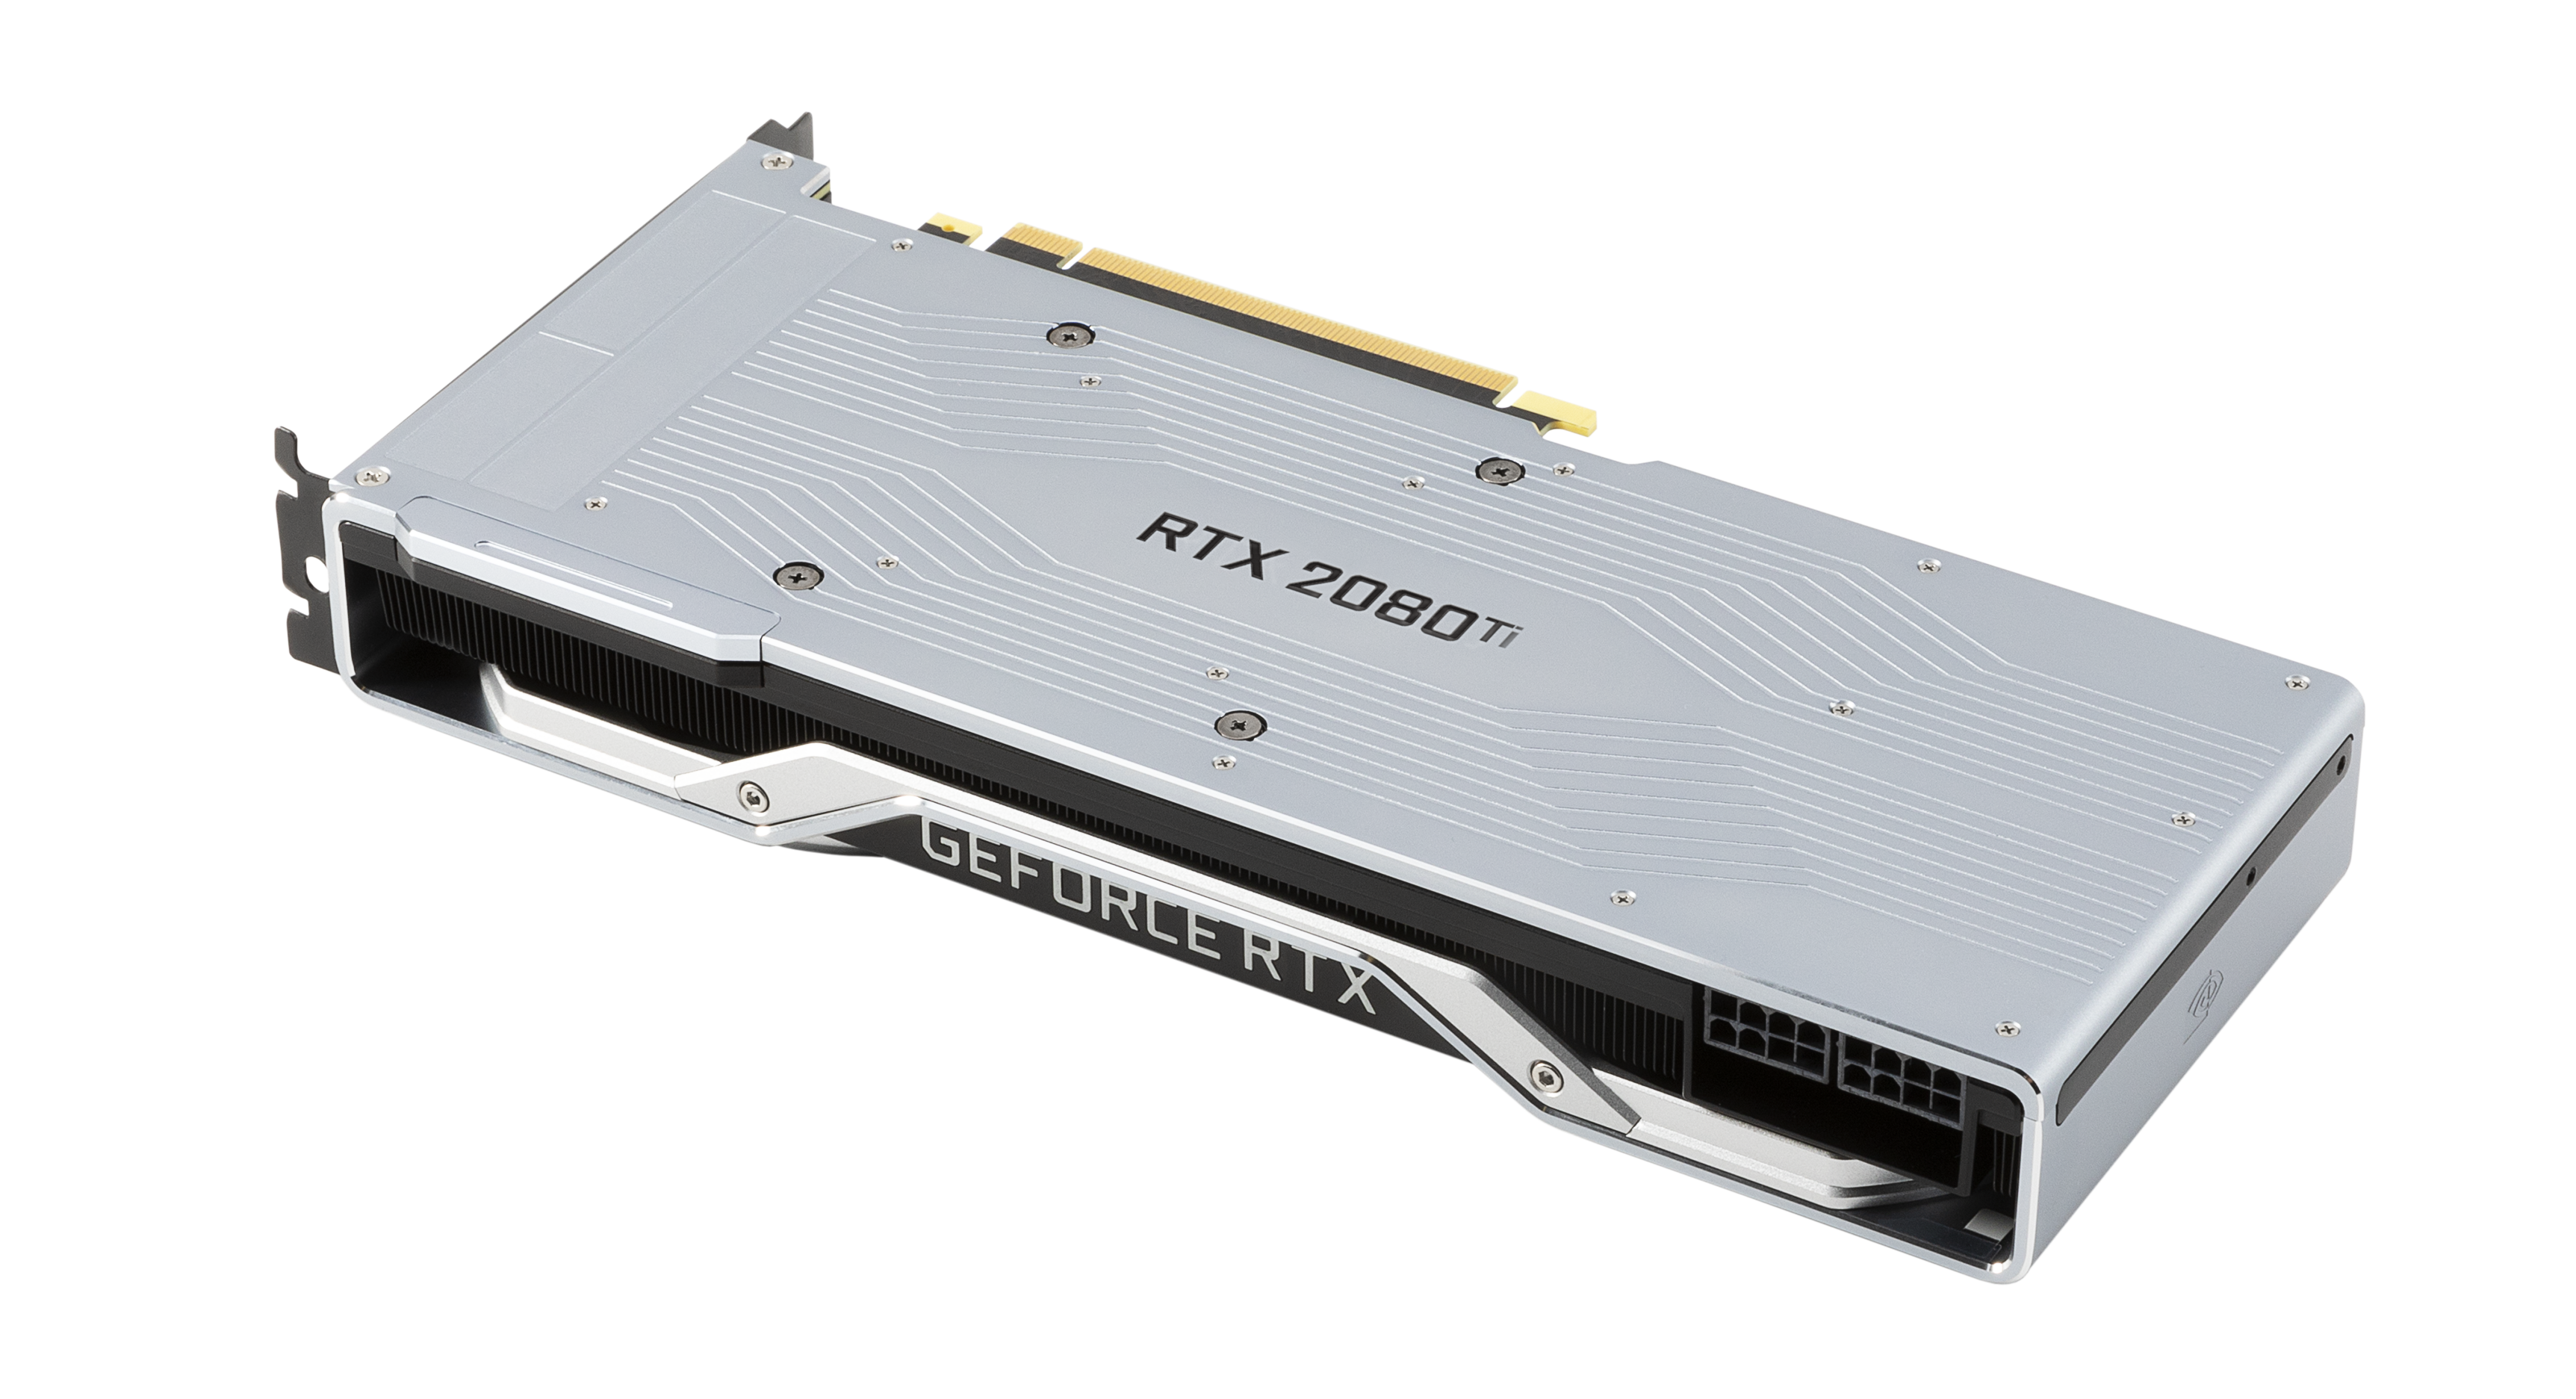 Meet The RTX 2080 & RTX 2080 Founders Editions Cards - The NVIDIA GeForce RTX 2080 Ti & RTX Founders Edition Review: Foundations For A Ray Traced Future